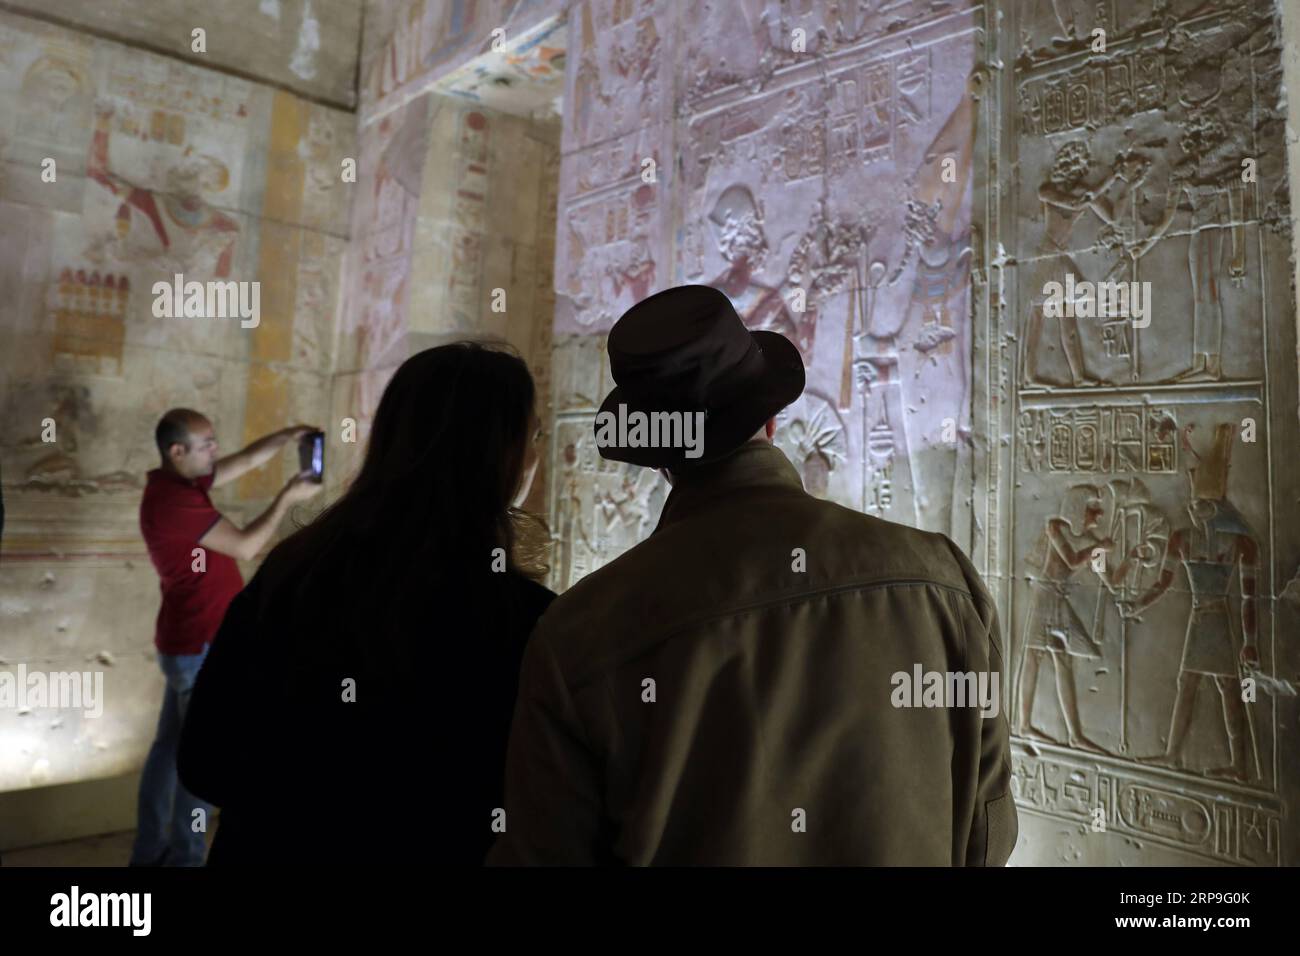 (190406) -- SOHAG, April 6, 2019 (Xinhua) -- People visit the Mortuary Temple of Seti I in Sohag, Egypt, on April 5, 2019. The Mortuary Temple of Seti I is a memorial temple for Seti I, a king of the 19th dynasty and father of King Ramses II in ancient Egypt. (Xinhua/Ahmed Gomaa) EGYPT-SOHAG-MORTUARY TEMPLE OF SETI I PUBLICATIONxNOTxINxCHN Stock Photo